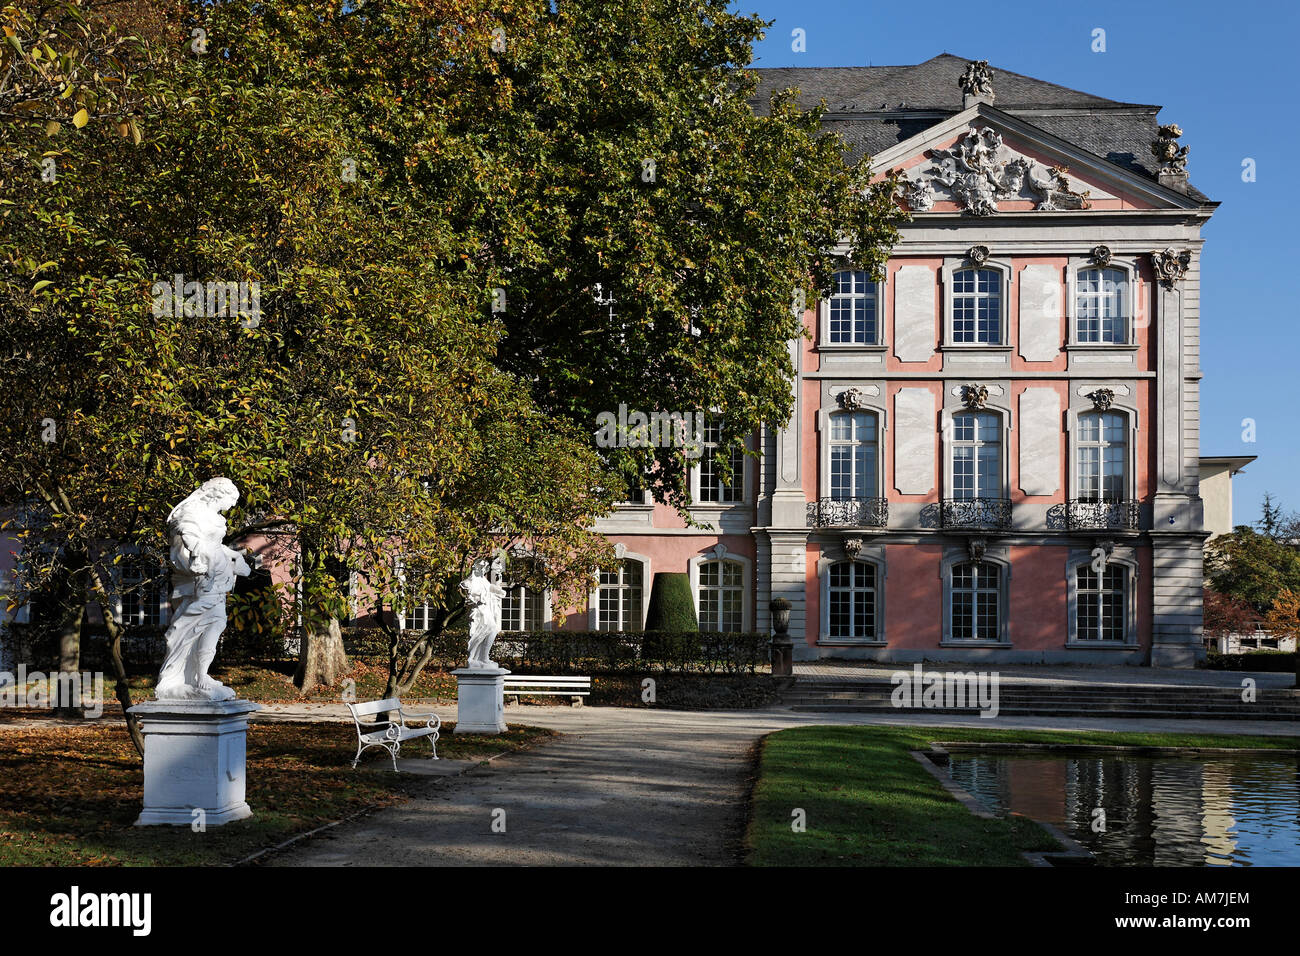 Palace grounds of the prince elector, Trier, Rhineland-Palatinate, Germany Stock Photo